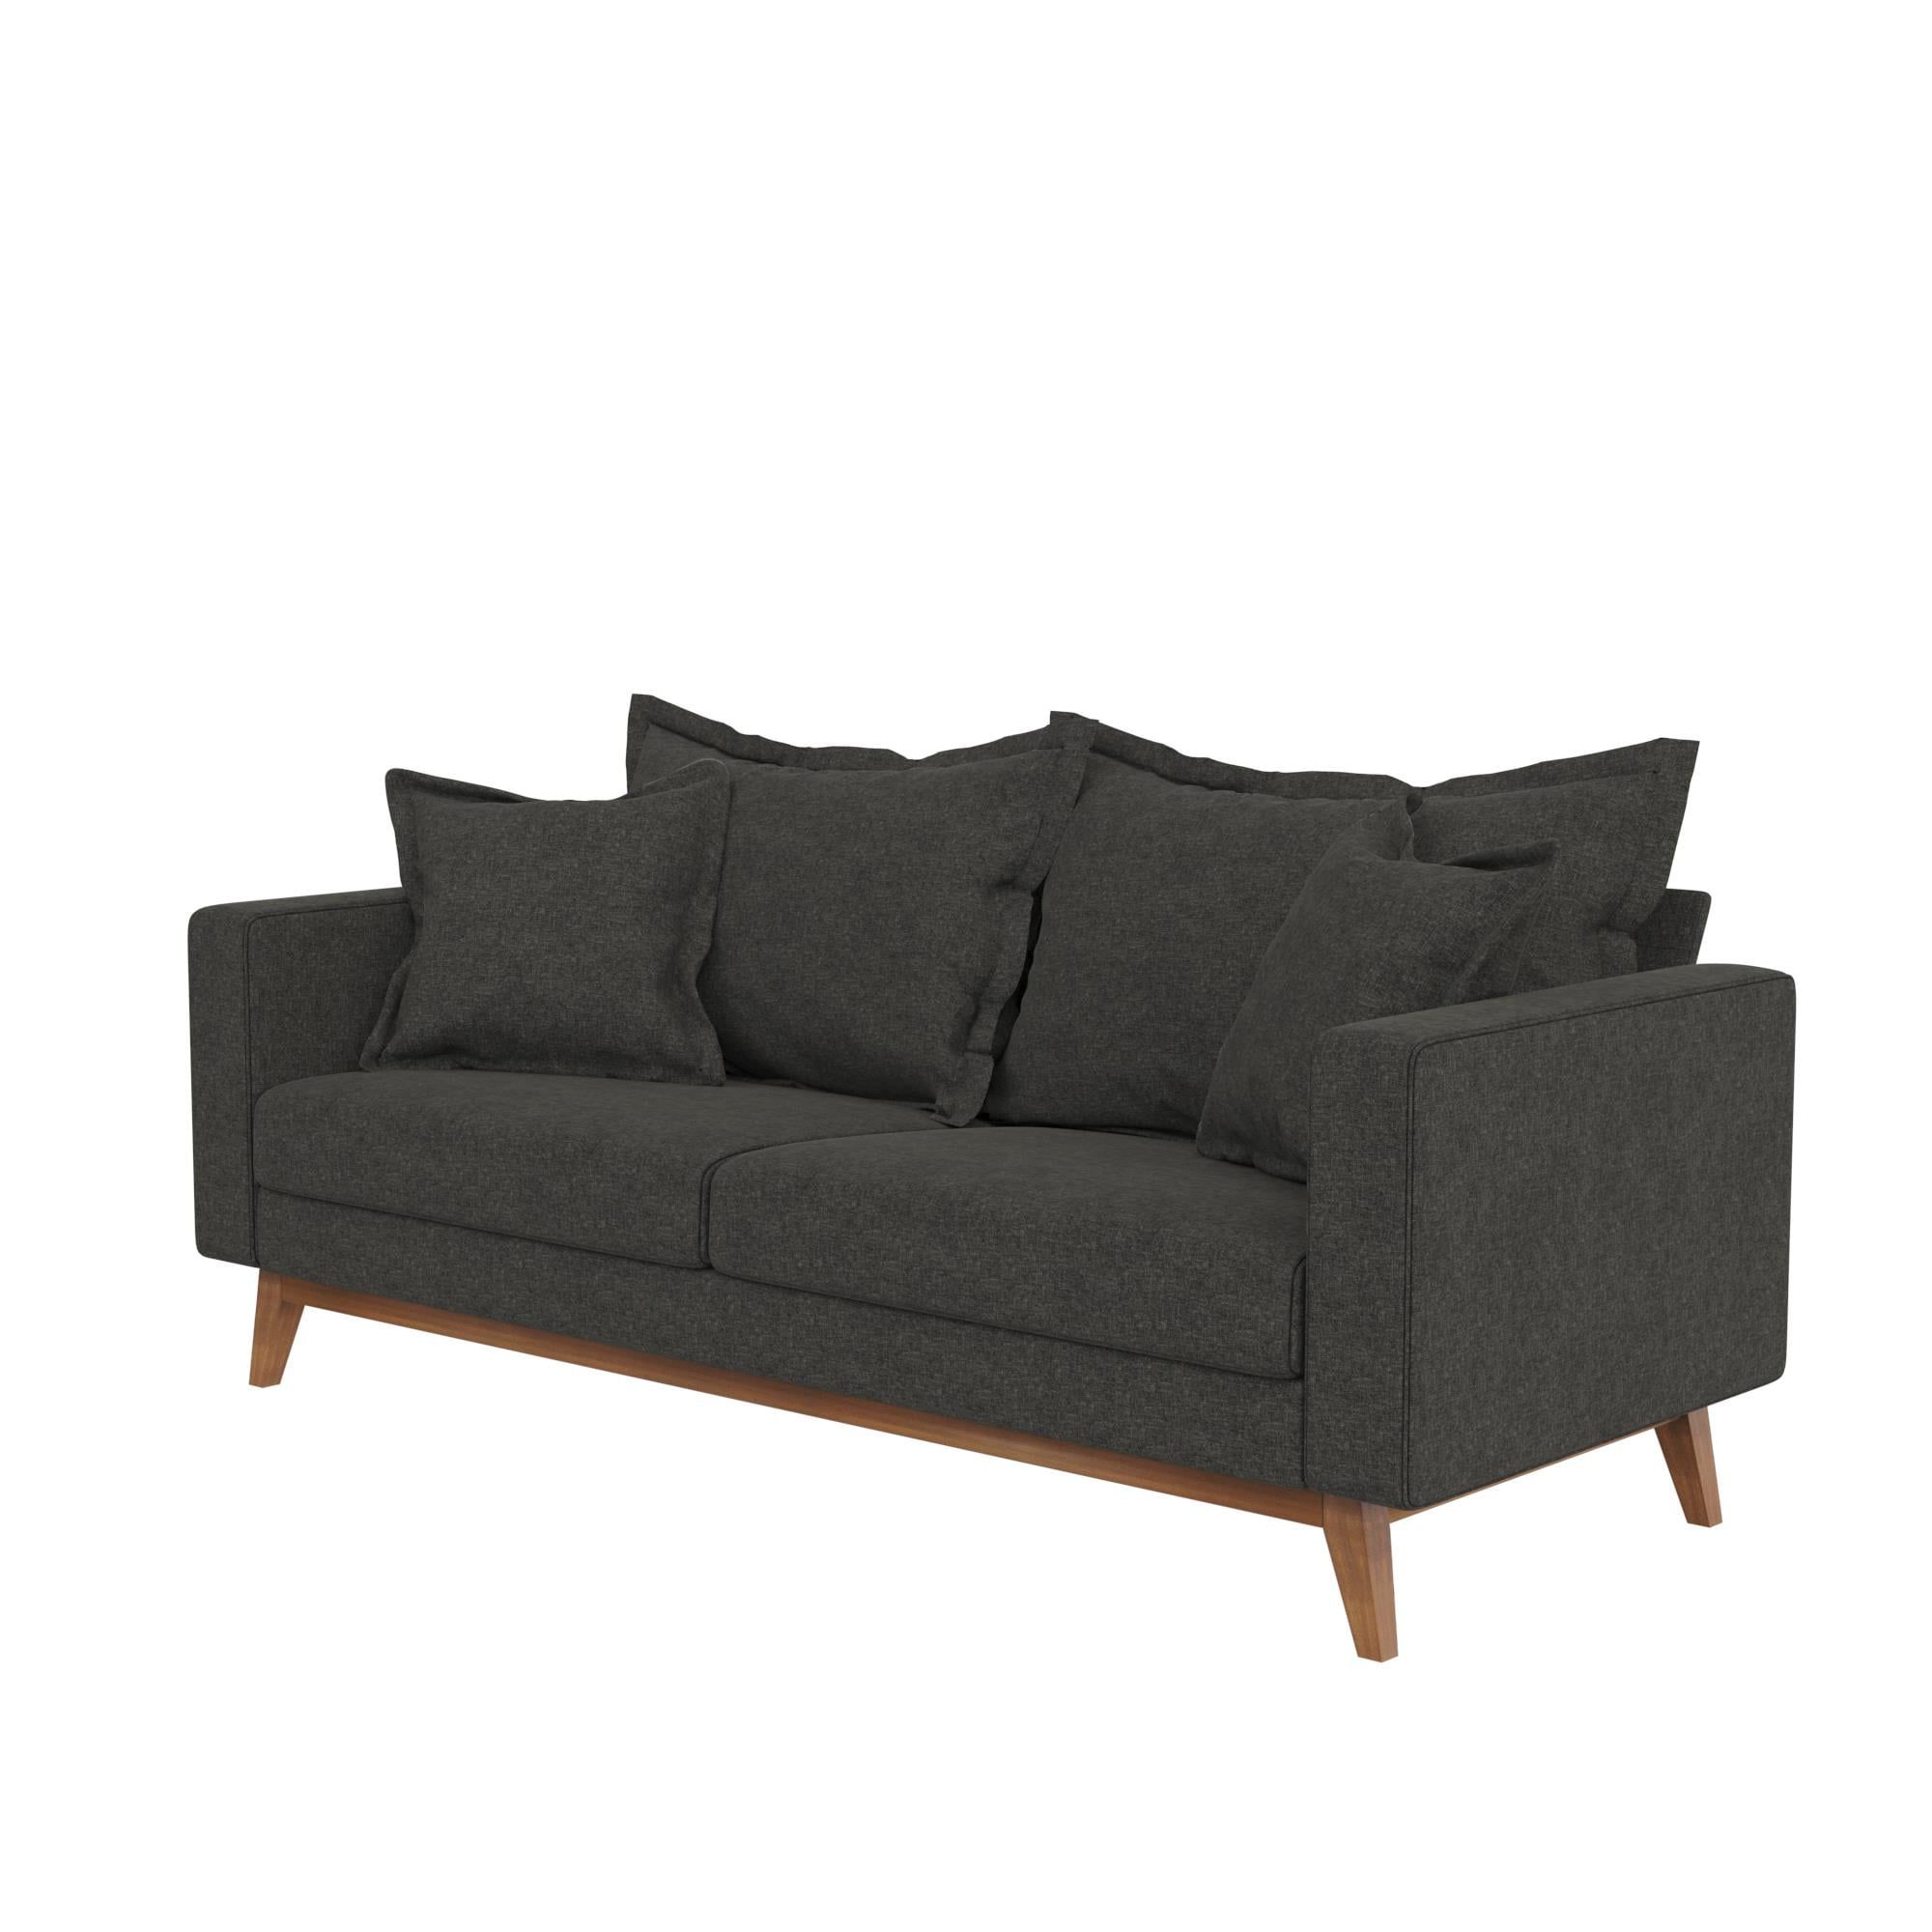 Dhp Miriam Pillowback Wood Base Sofa, Gray Linen – Walmart With Regard To Most Current Sofas With Pillowback Wood Bases (View 11 of 15)